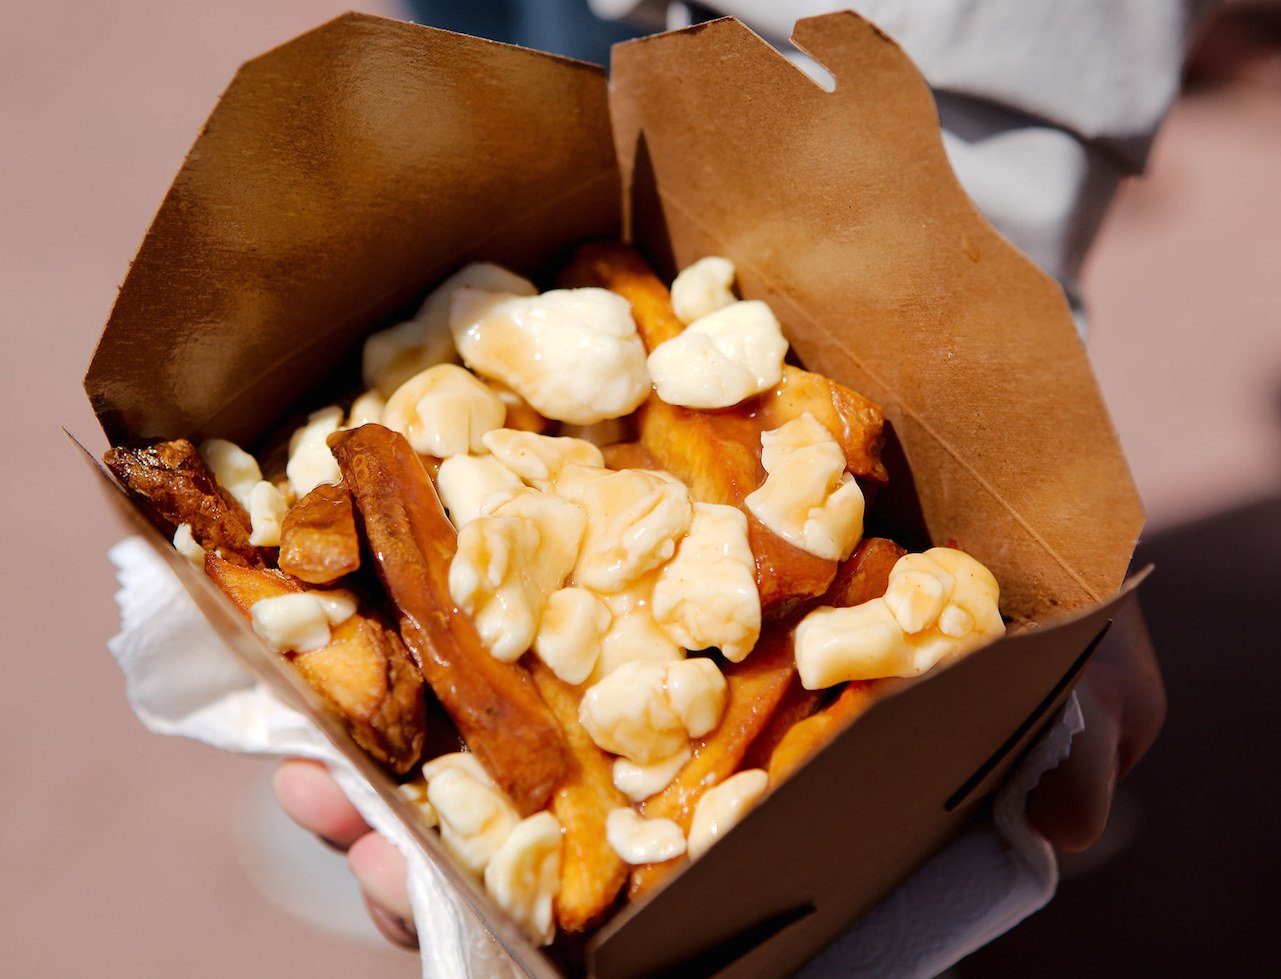 Peak poutine: How the messy trio of fries, curds, and gravy became Canada’s favourite food